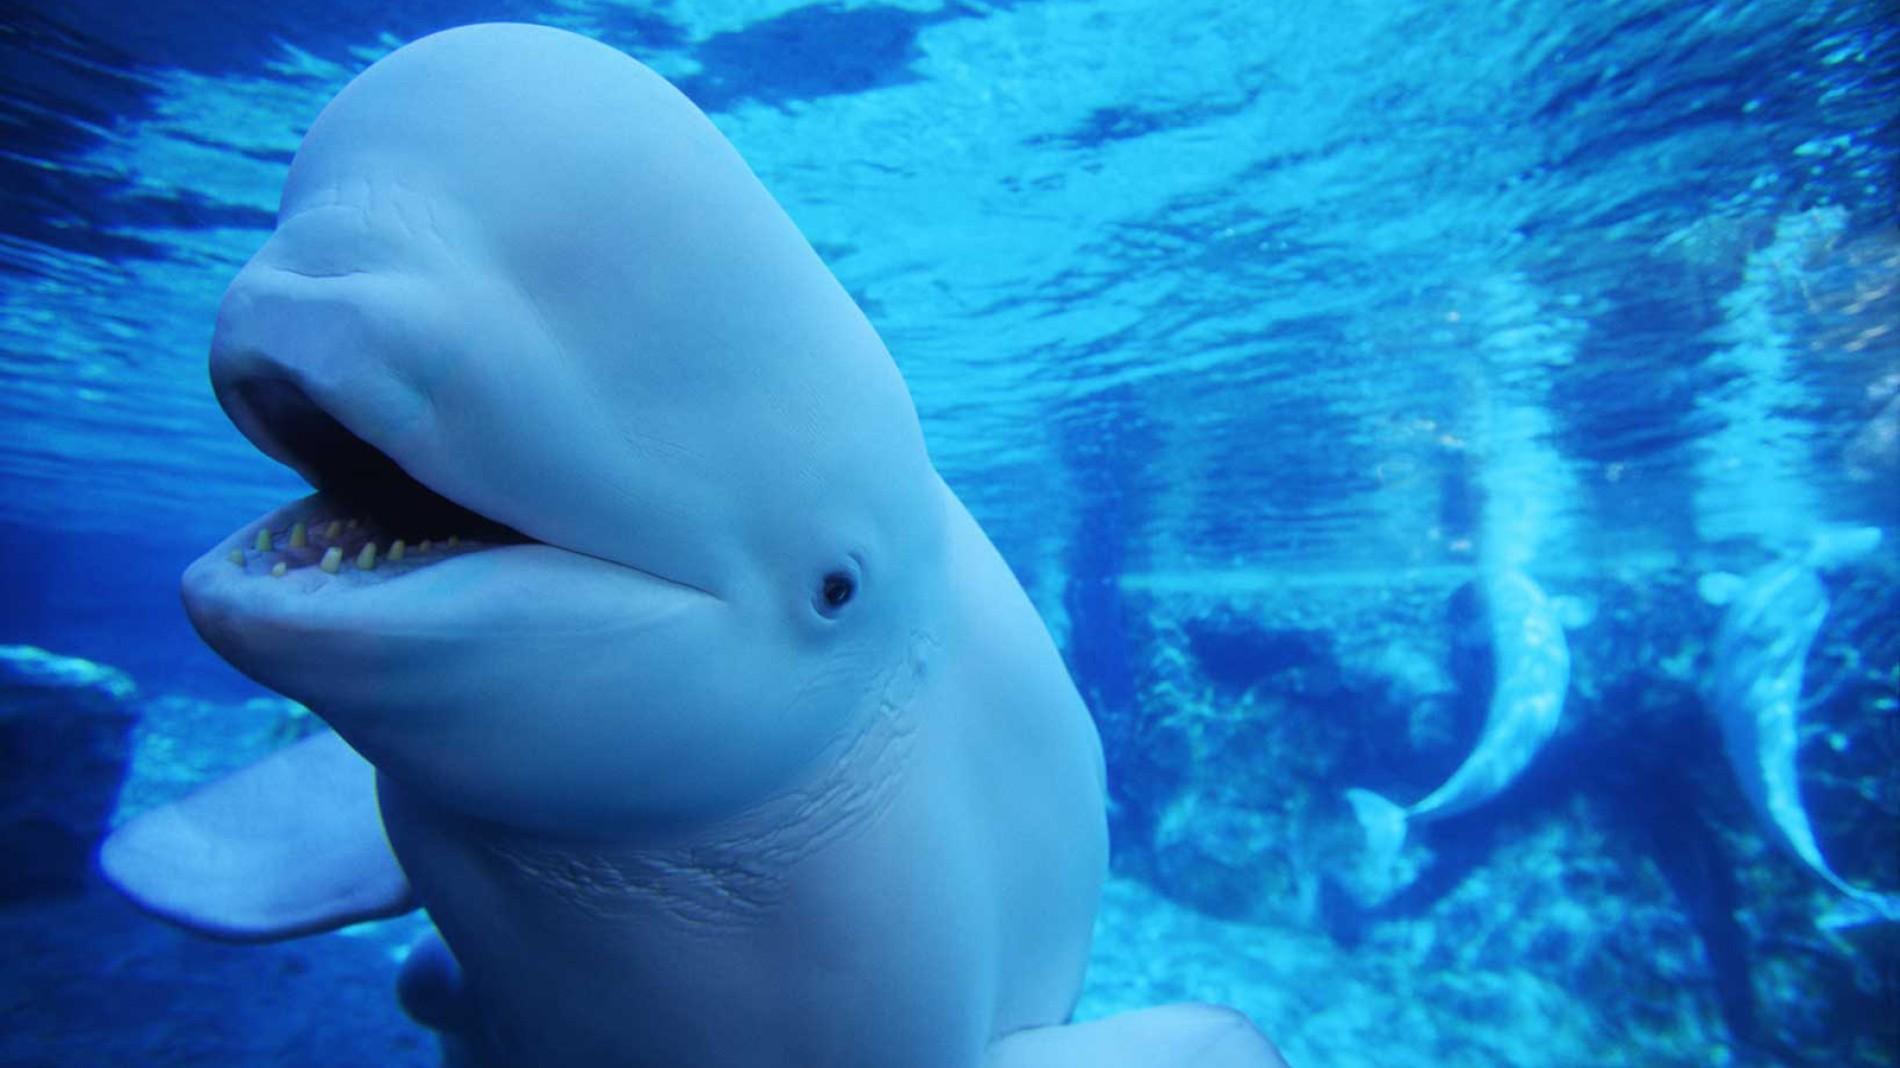 Why are you interested in beluga whales?I am interested b